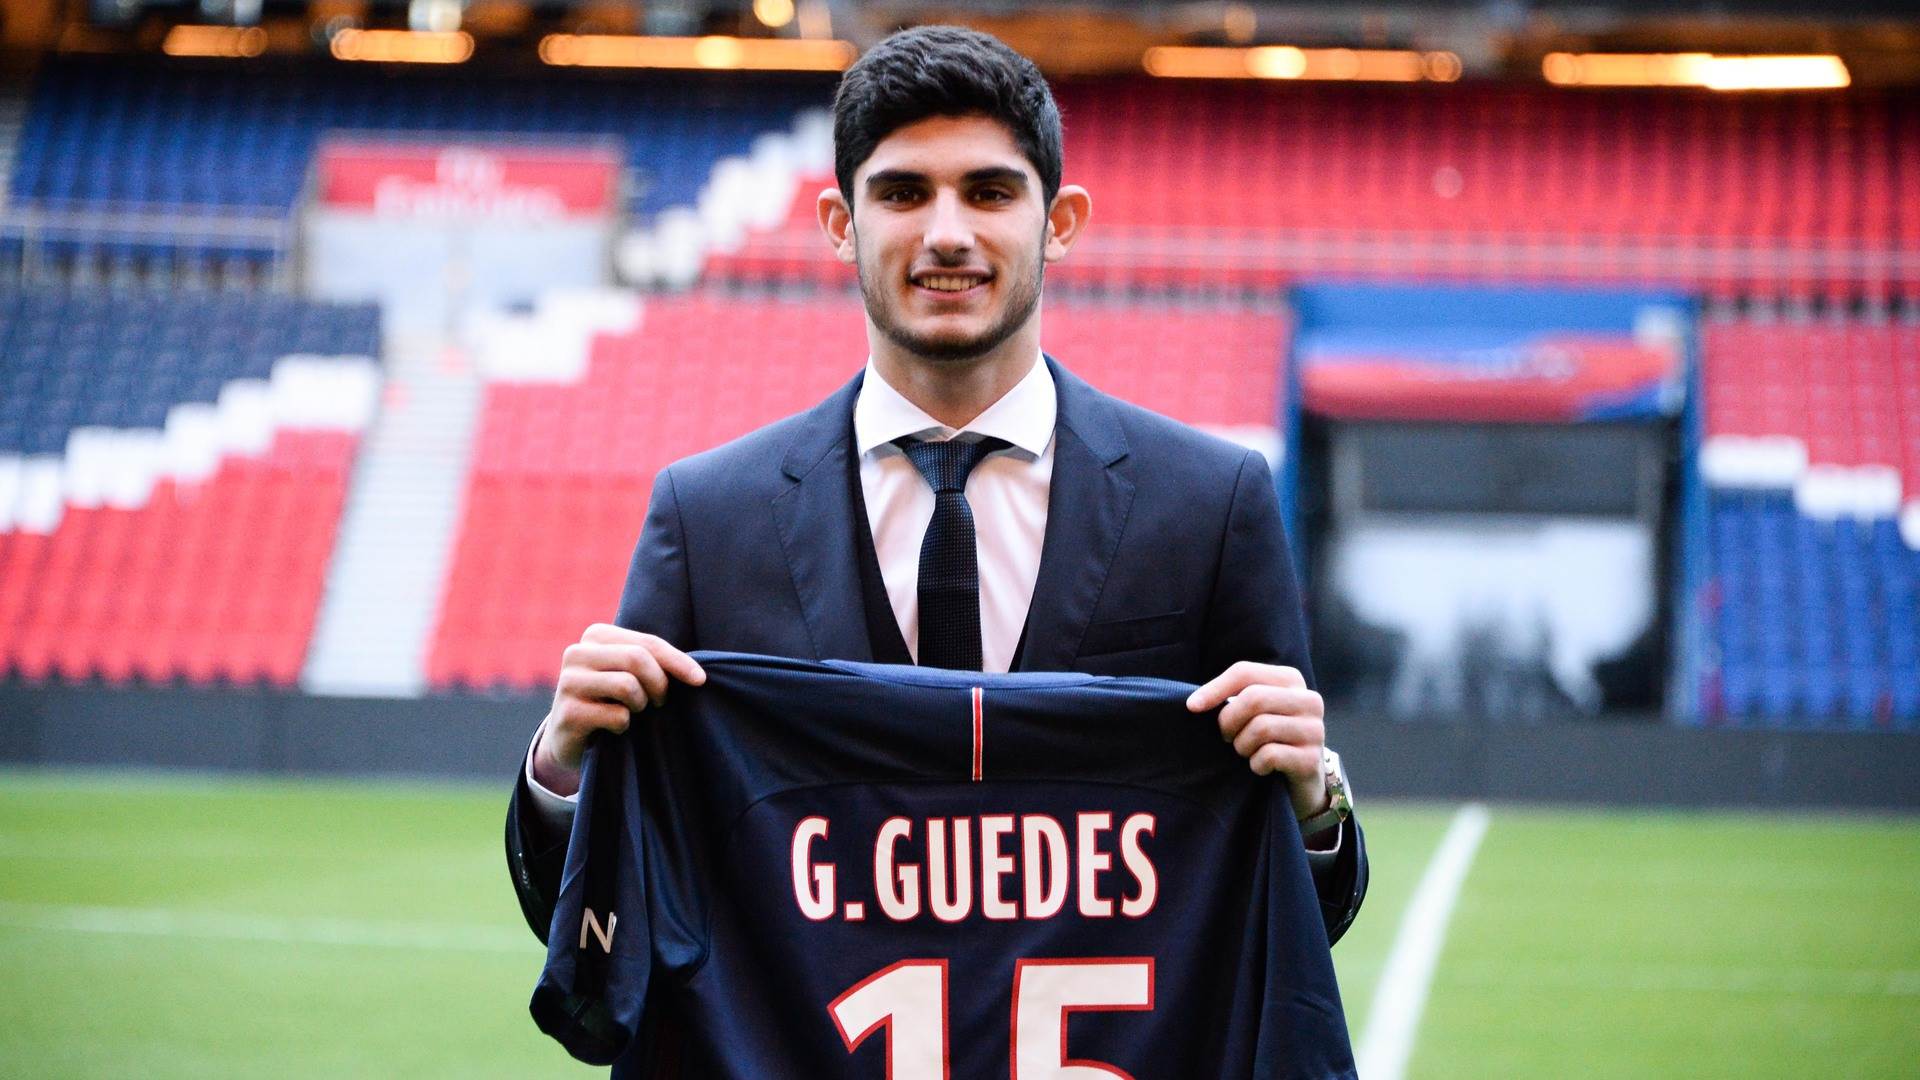 goncalo guedes - photo #28